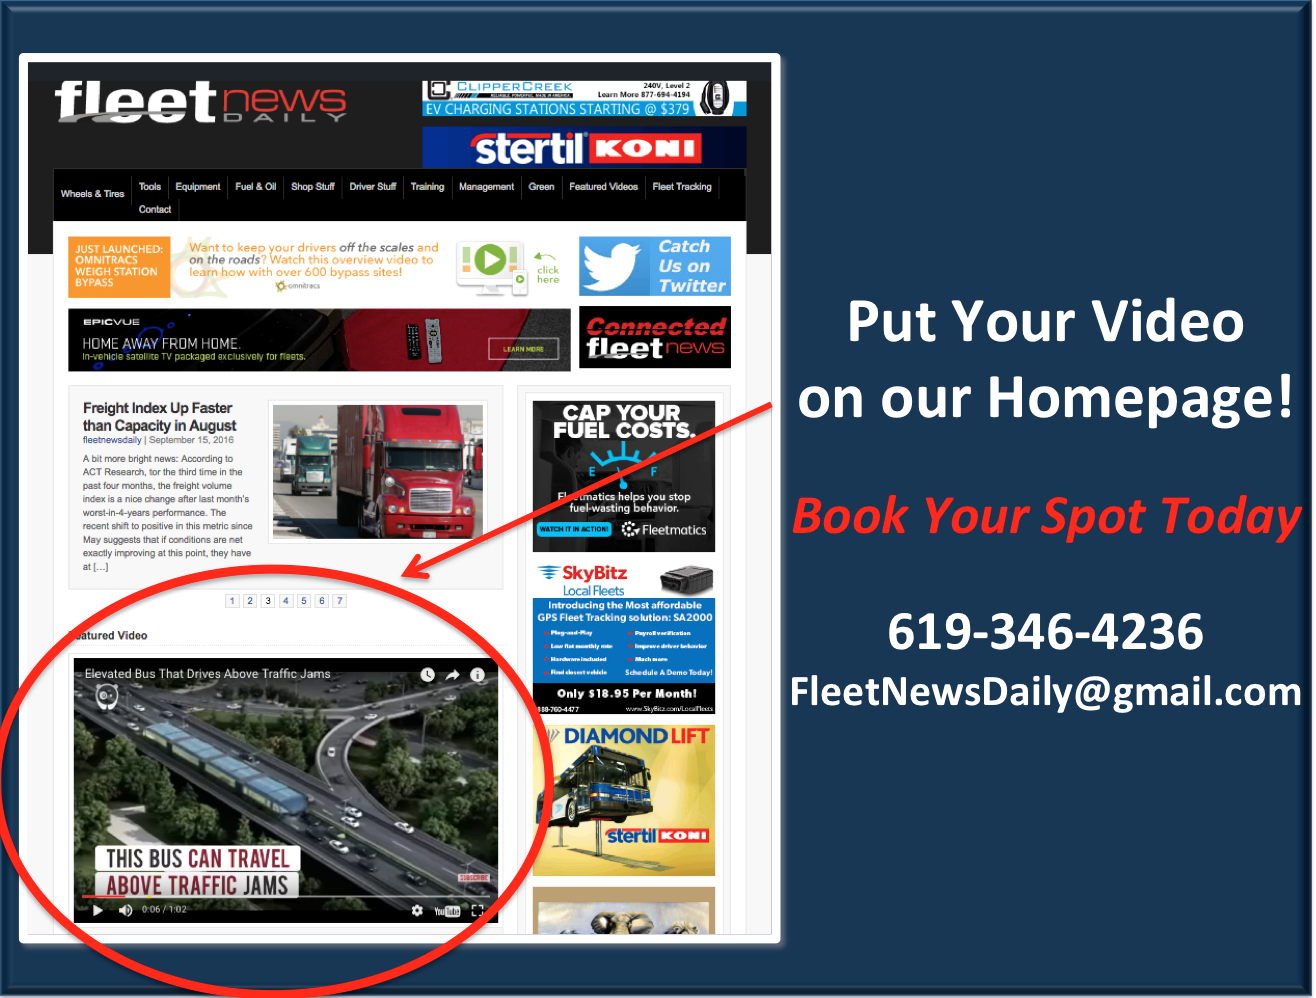 Fleet News Daily Introduces New Featured Video “Big Screen” on Homepage